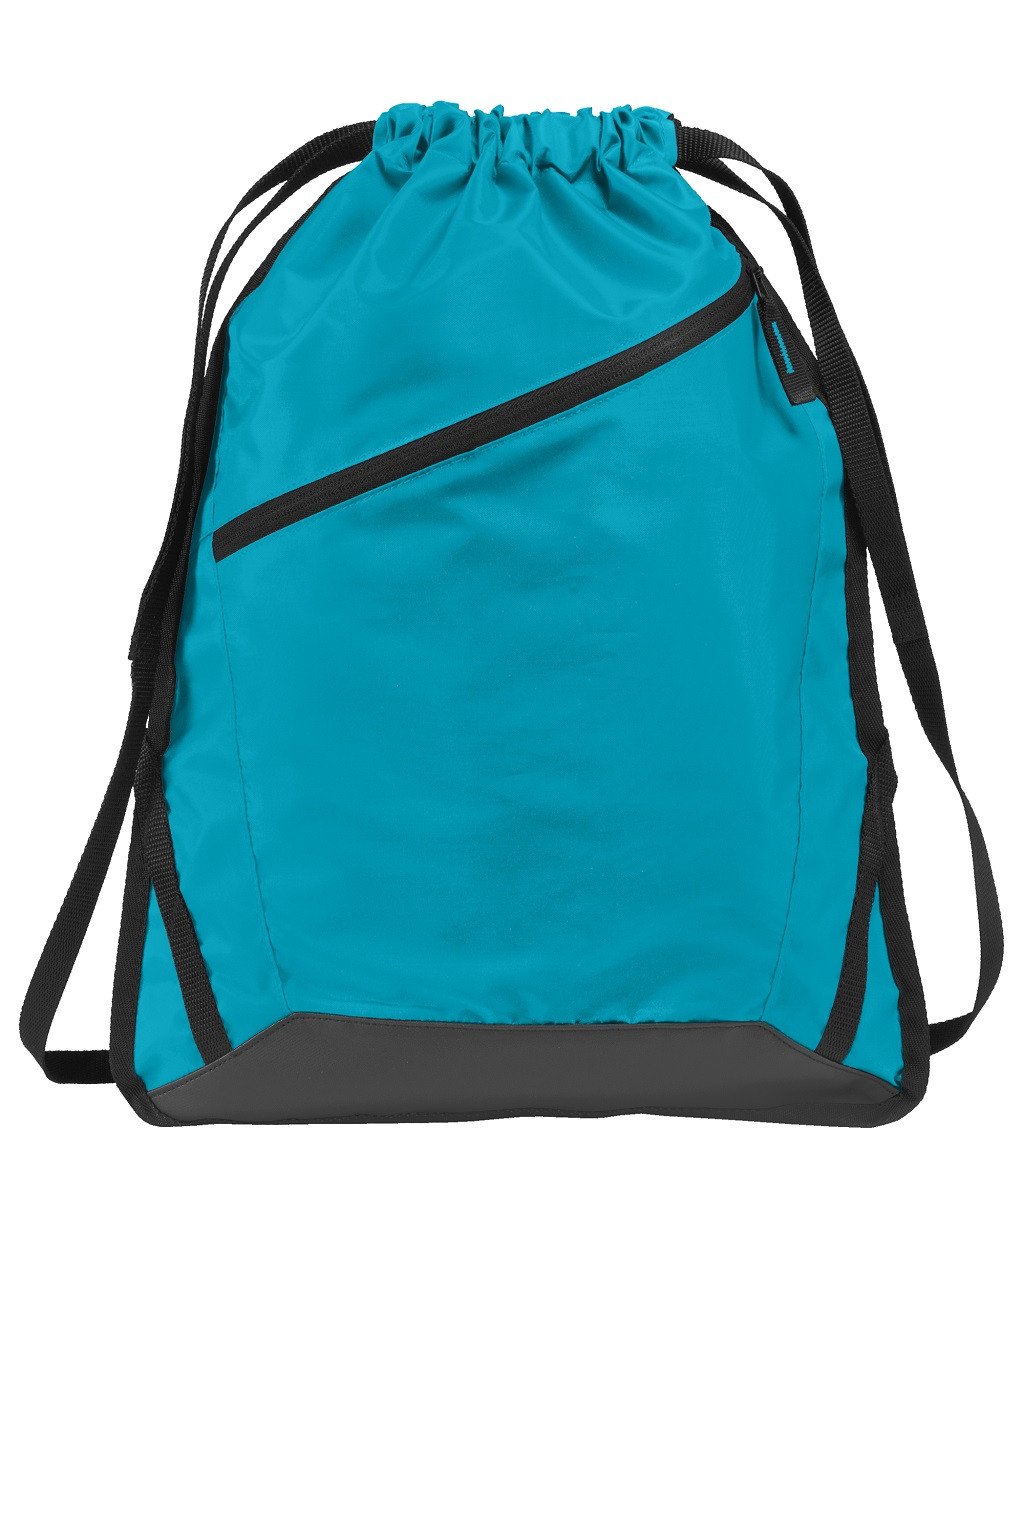 Zip-It Drawstring Backpack with Adjustable Straps